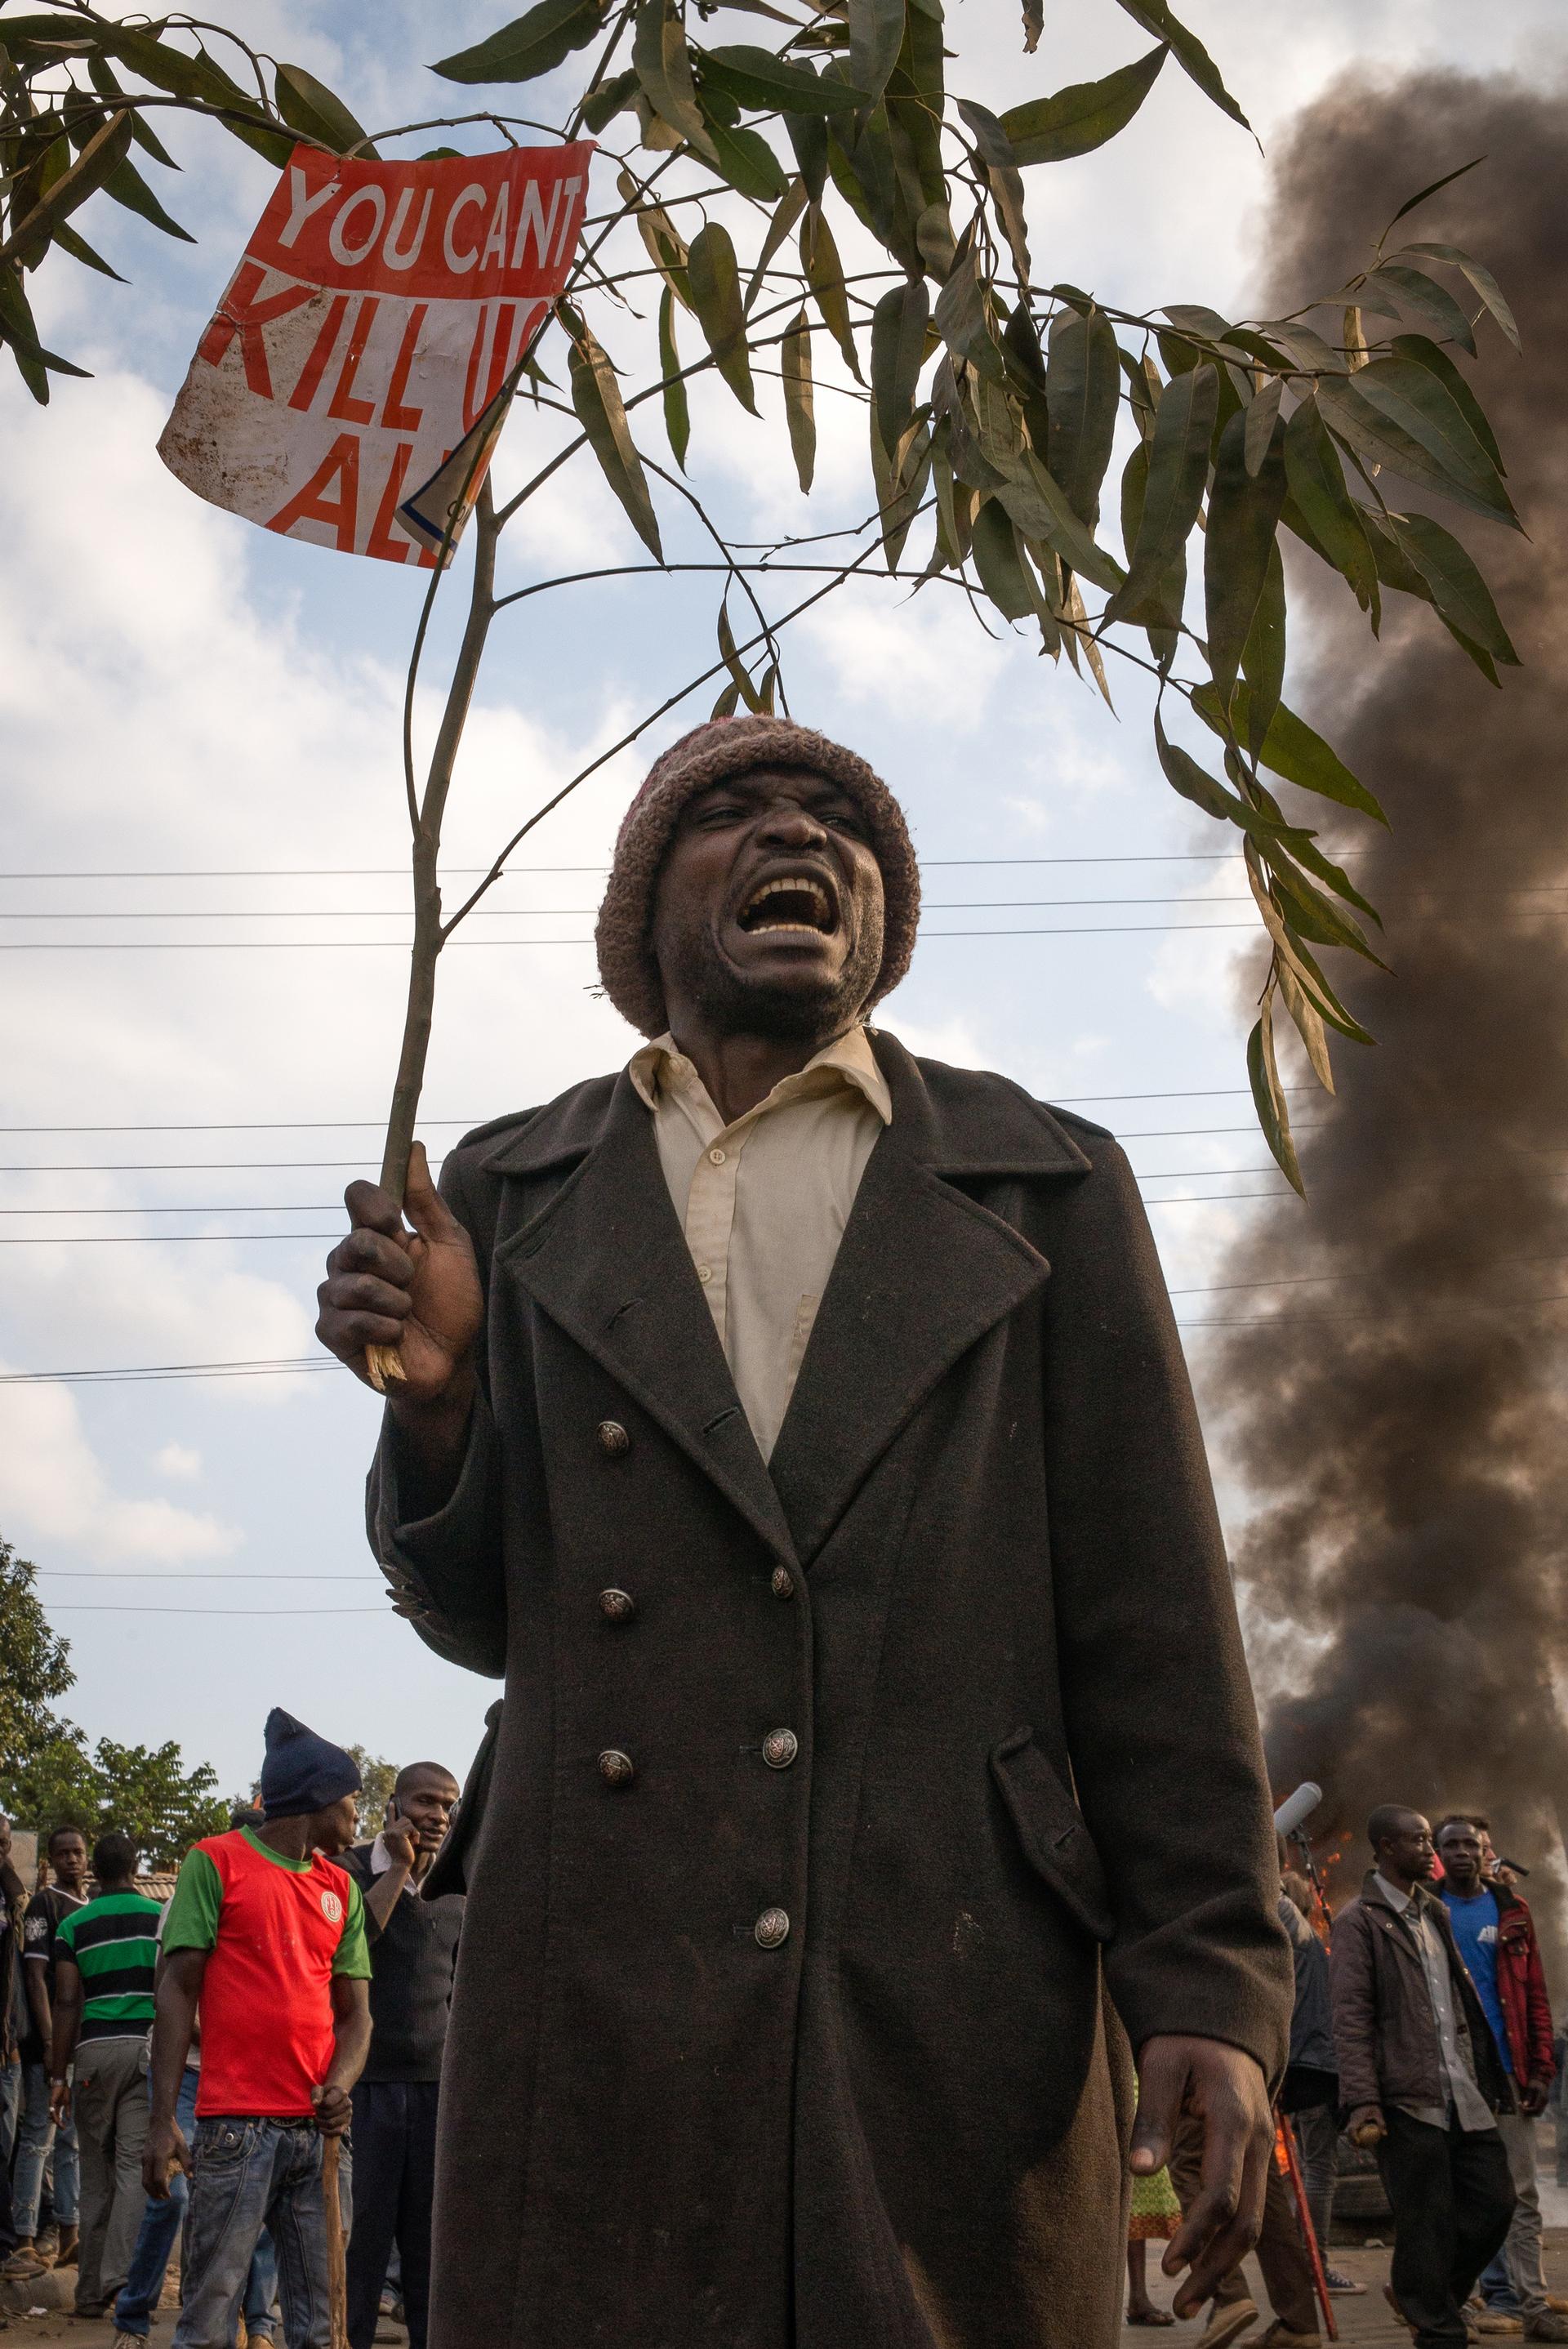 A man holds a sign that reads “you can’t kill us all” during a protest in an informal settlement in Nairobi, Kenya. Protesters were demanding that current President Uhuru Kenyatta concede to presidential candidate Raila Odinga of the opposition party.